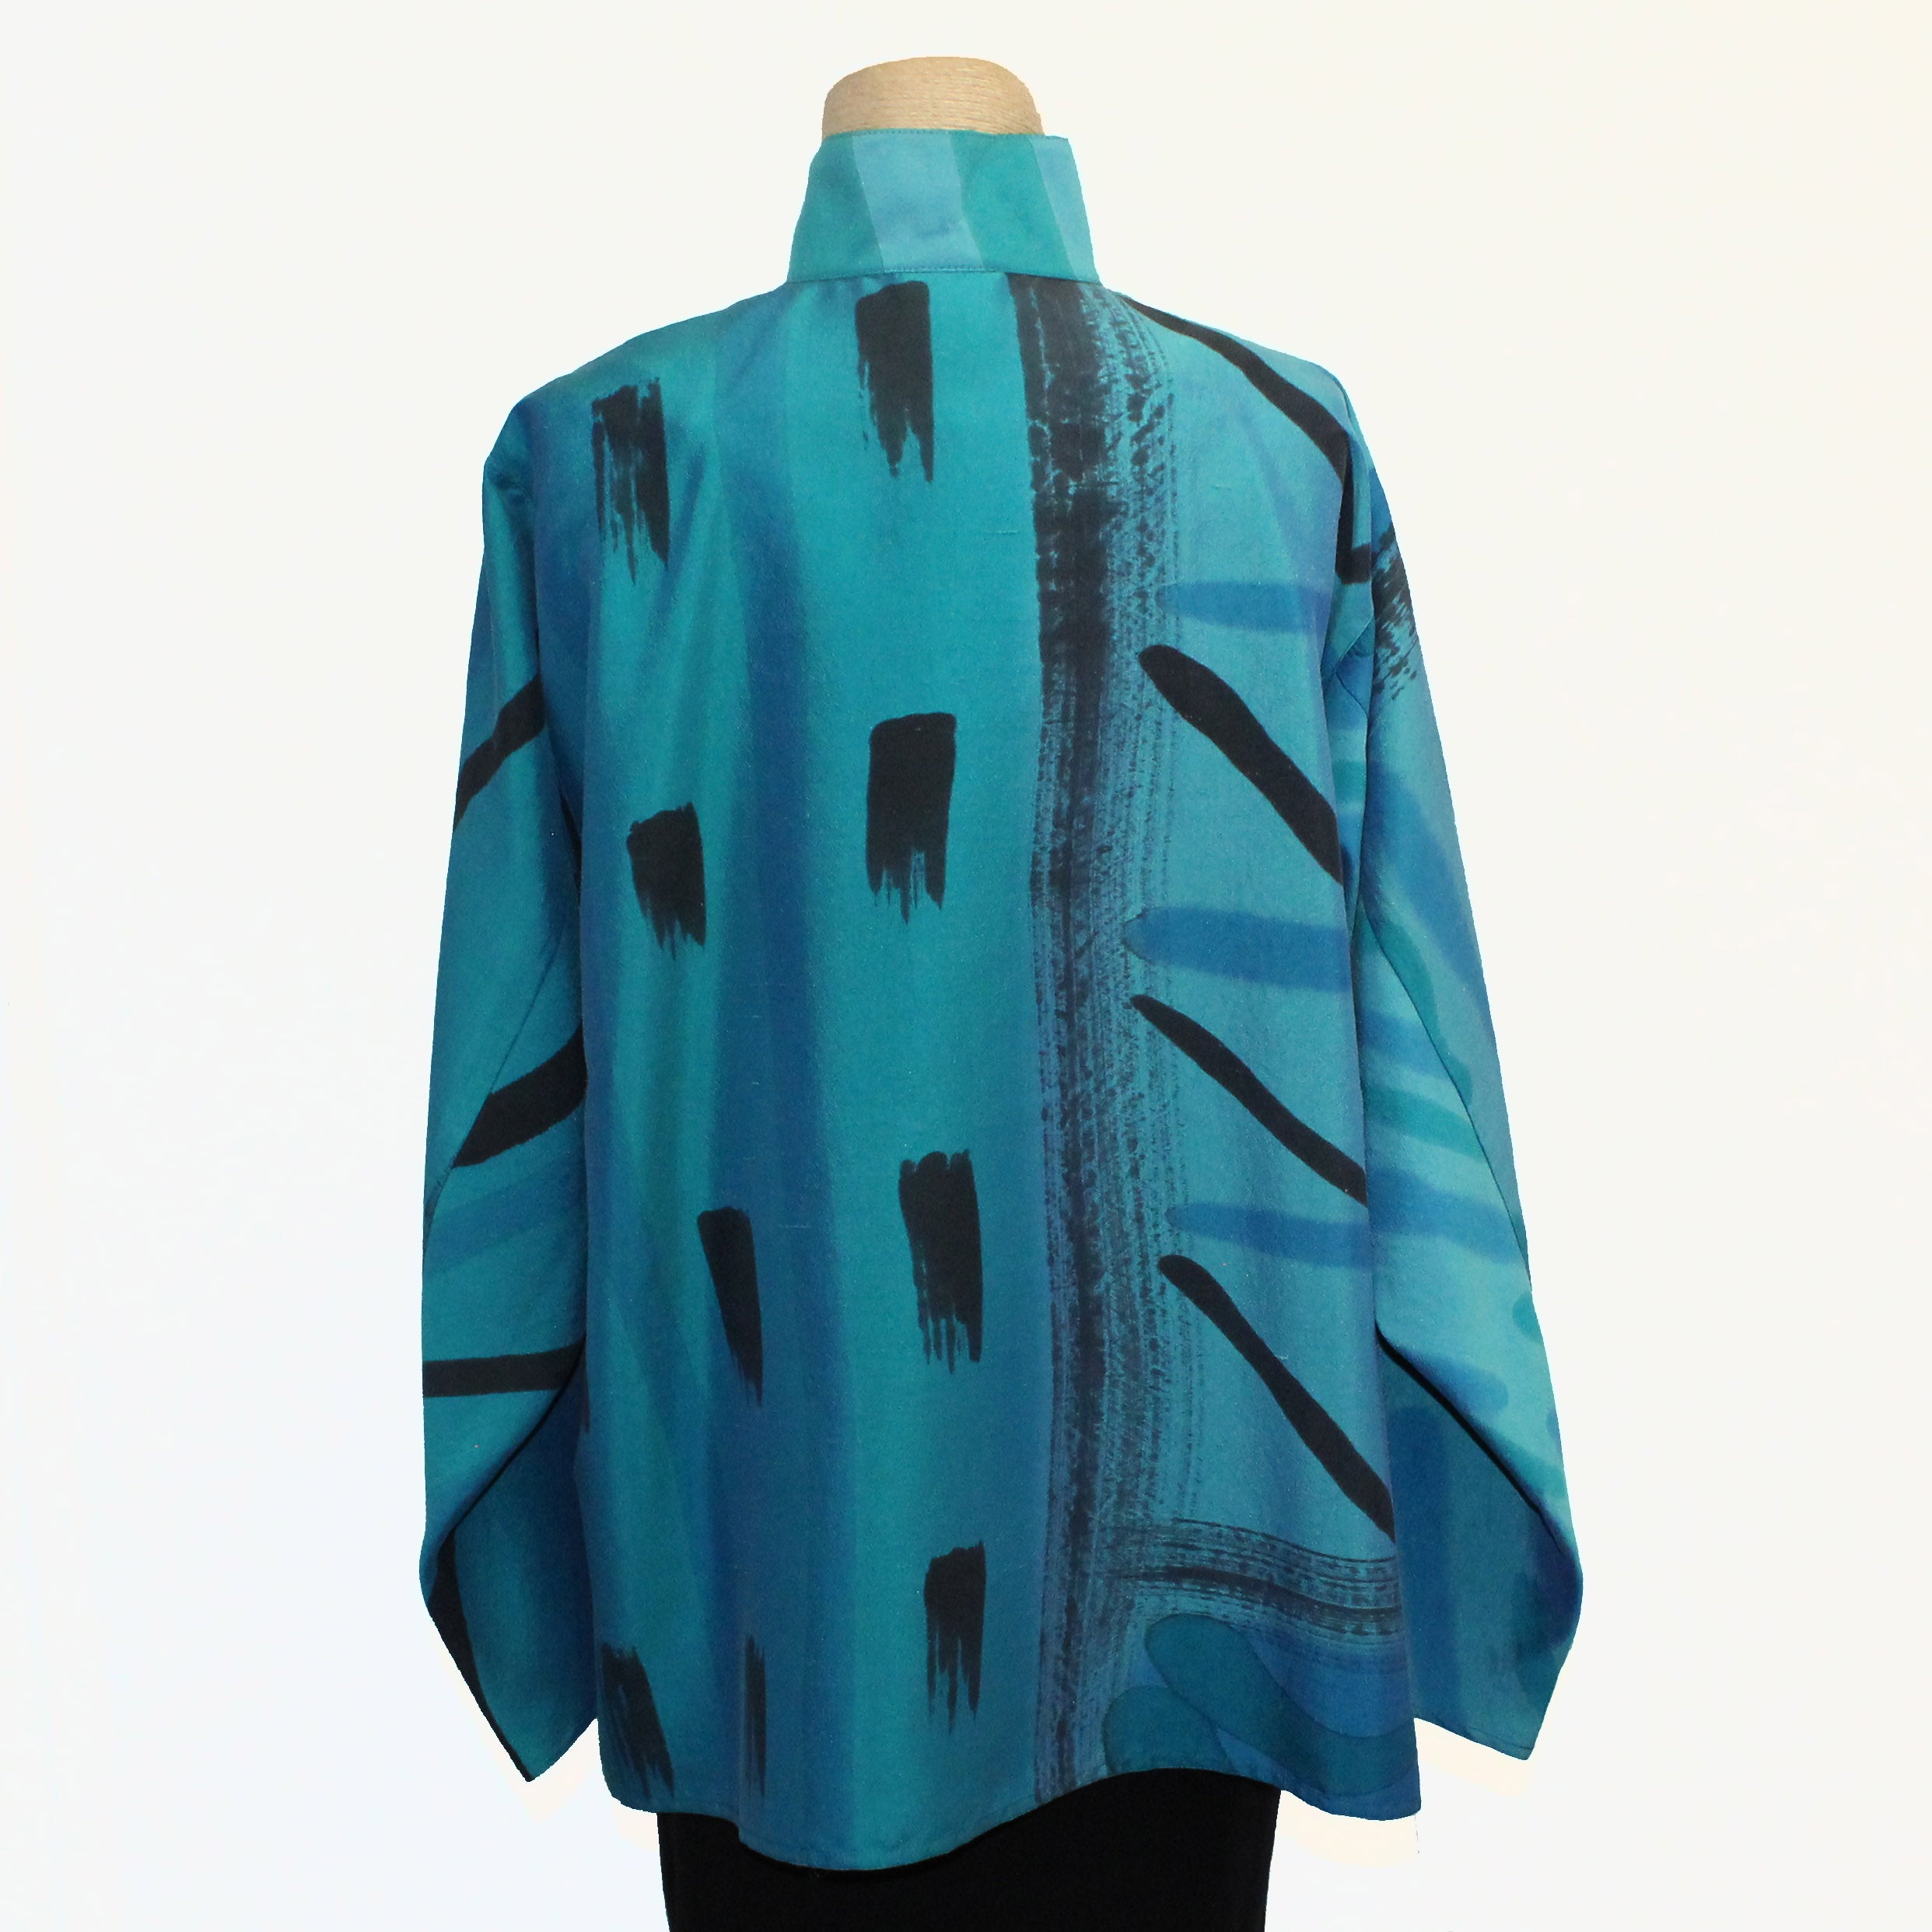 Kay Chapman Shirt, Issey, Why Not, Turquoise/Blue, S